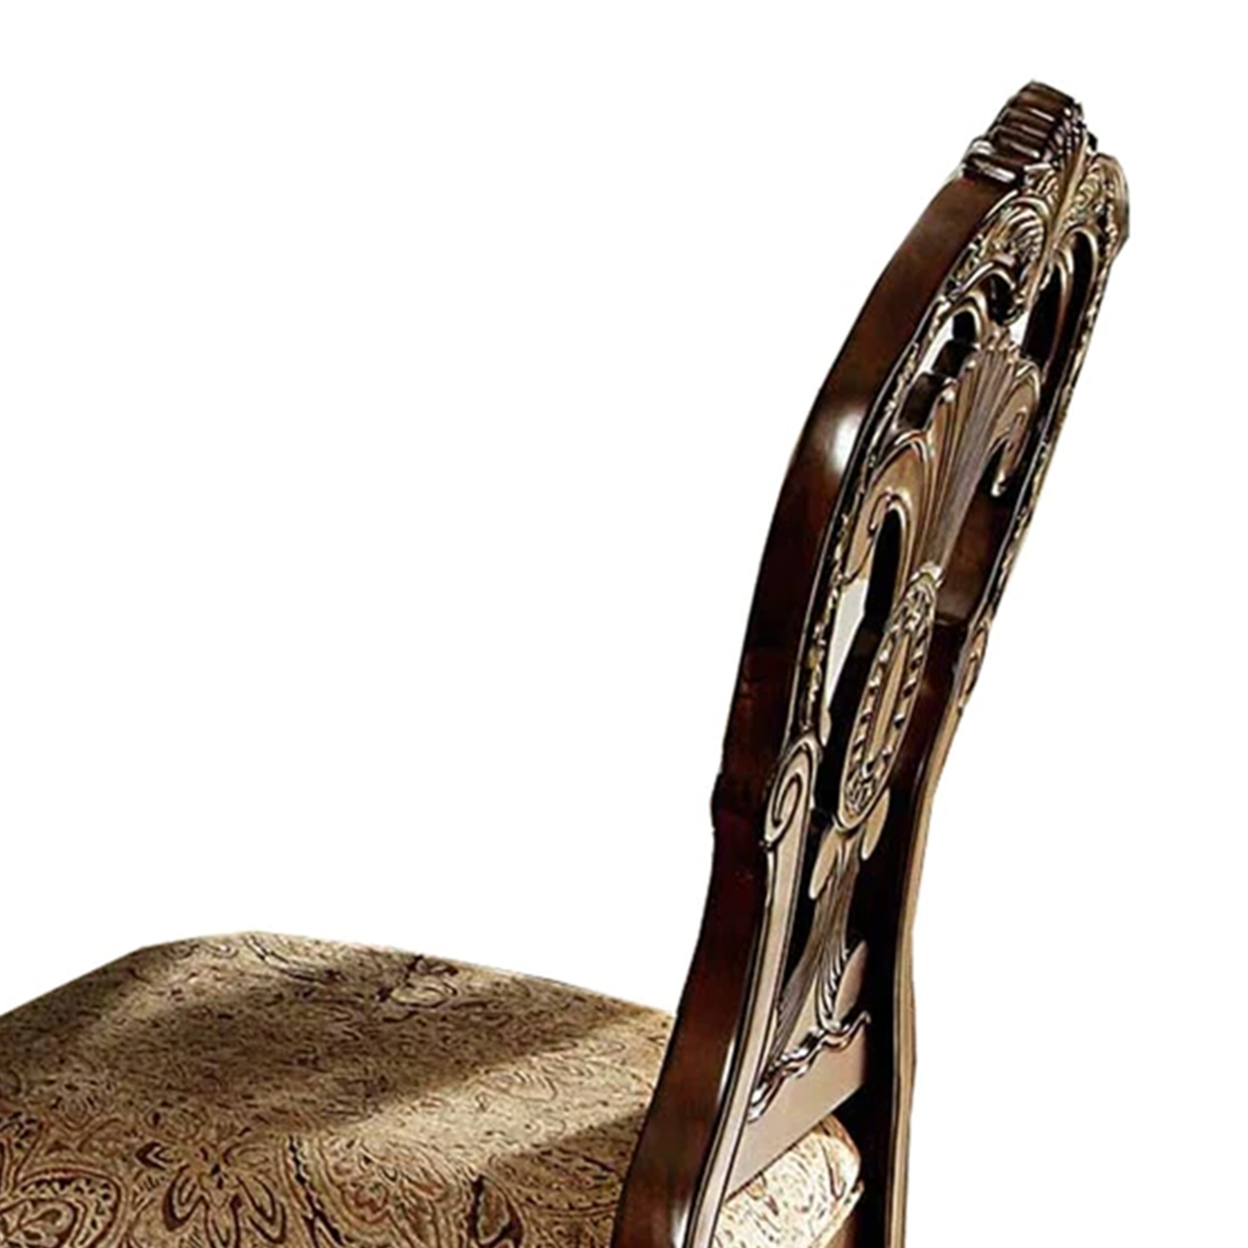 Wood Fabric Arm Chair With Deep Engraved Design, Brown & Beige (Set Of 2)- Saltoro Sherpi